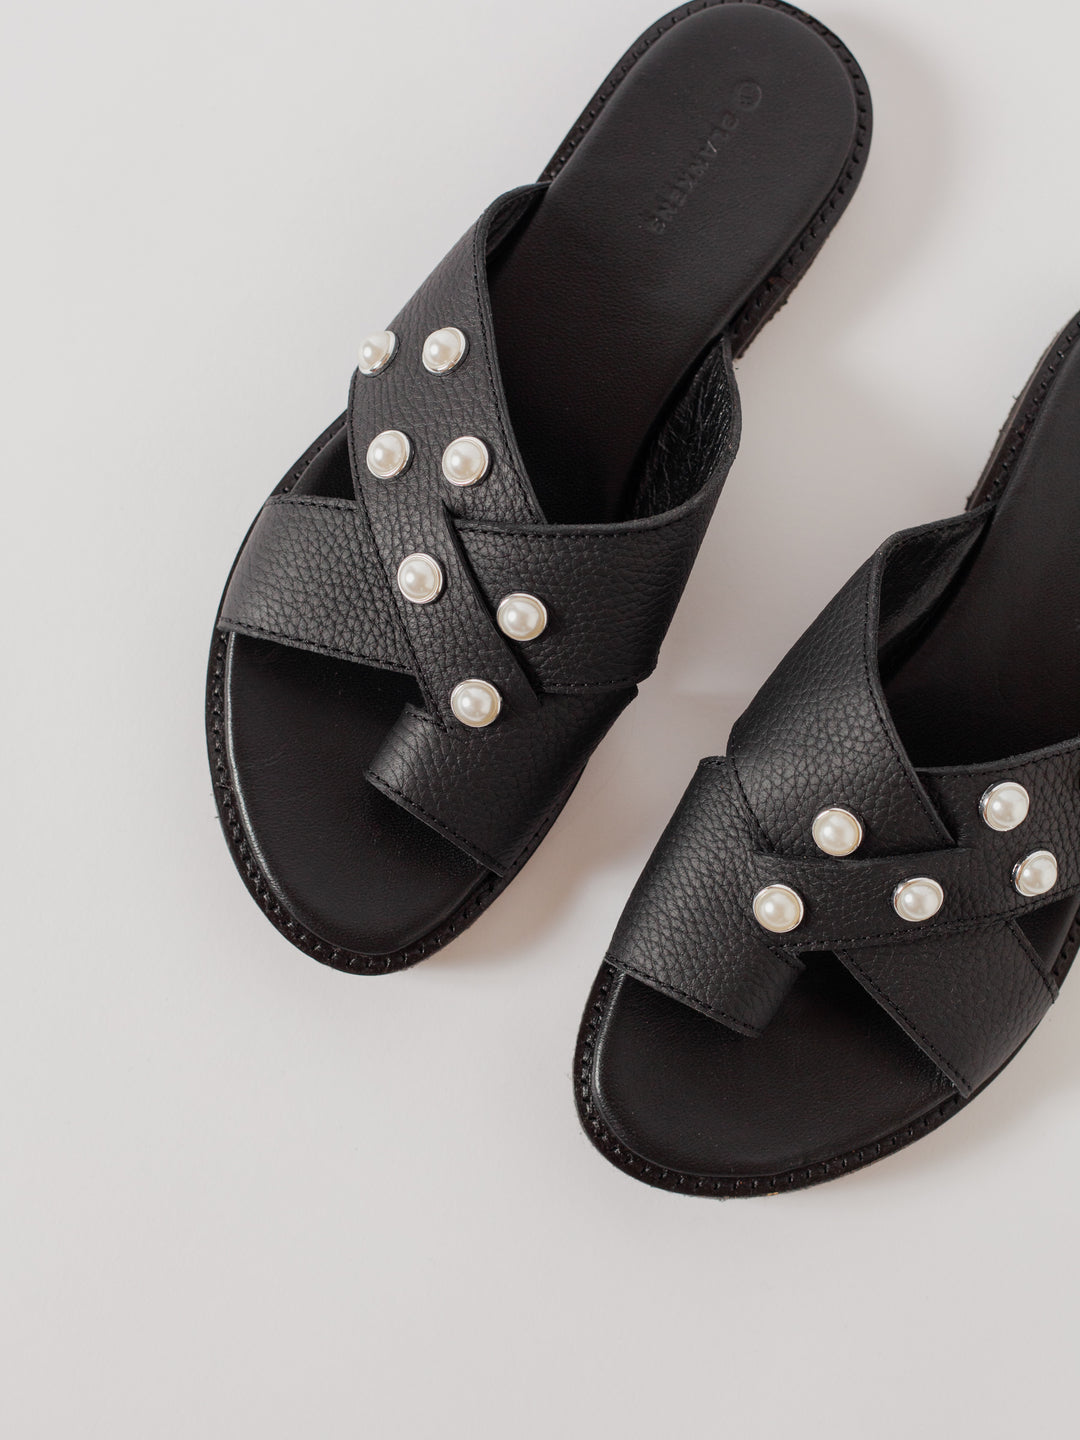 THE METTE BLACK ECO LEATHER WITH PEARLS